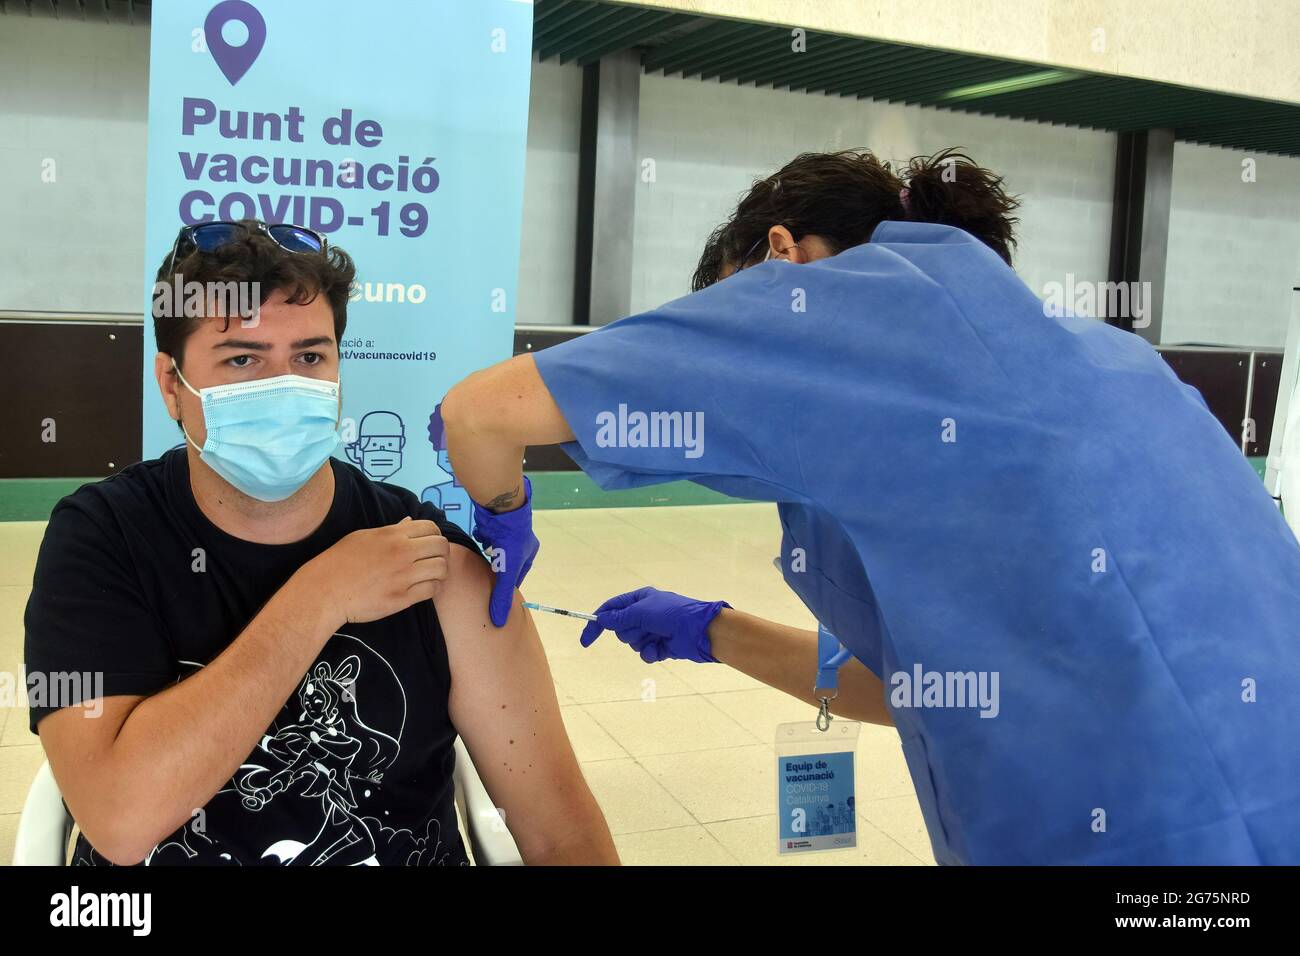 Calafell, Spain. 11th July, 2021. A health worker administers the first dose Comirnaty (PfizerBioNTech) COVID-19 mRNA Vaccine to a man at the Calafell Vaccination Center. The Department of Health of Catalonia through the Xarxa Santa Tecla de Tarragona in prevention against the contagion of SARS-CoV-2 Covid-19 has administered the first dose of the COMIRNATY vaccine (COVID-19 mRNA vaccine, Pfizer-BioNTech) to people between the ages of 16 and 34 at the vaccination center located at the Joan Ortoll Sports Pavilion in Calafell. Credit: SOPA Images Limited/Alamy Live News Stock Photo